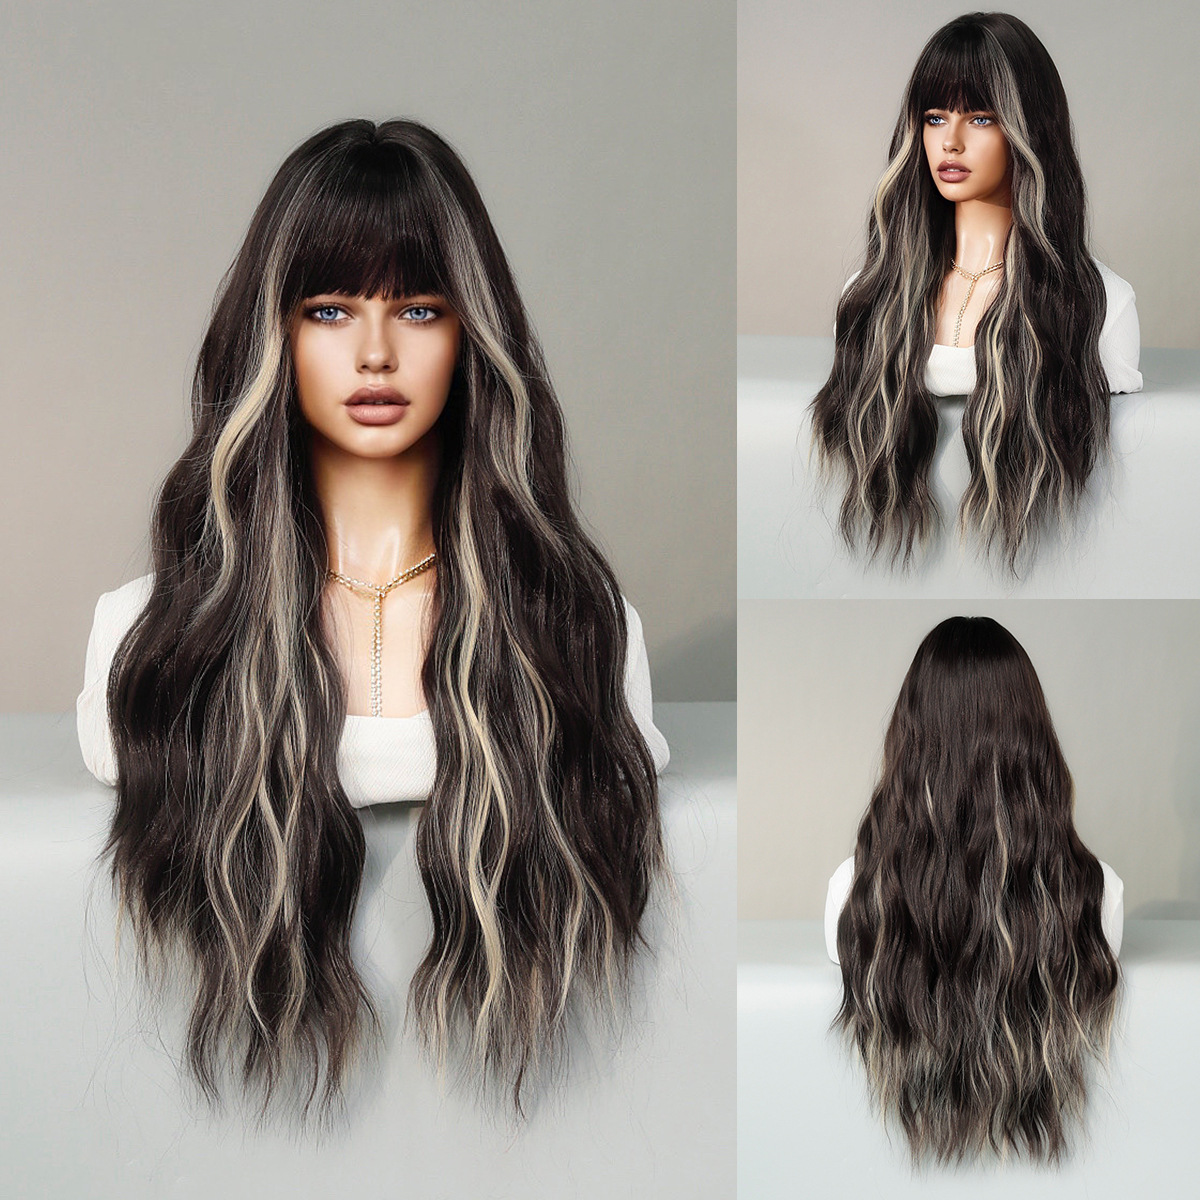 A wig with long wavy synthetic hair in brown highlights and bangs, perfect for a party